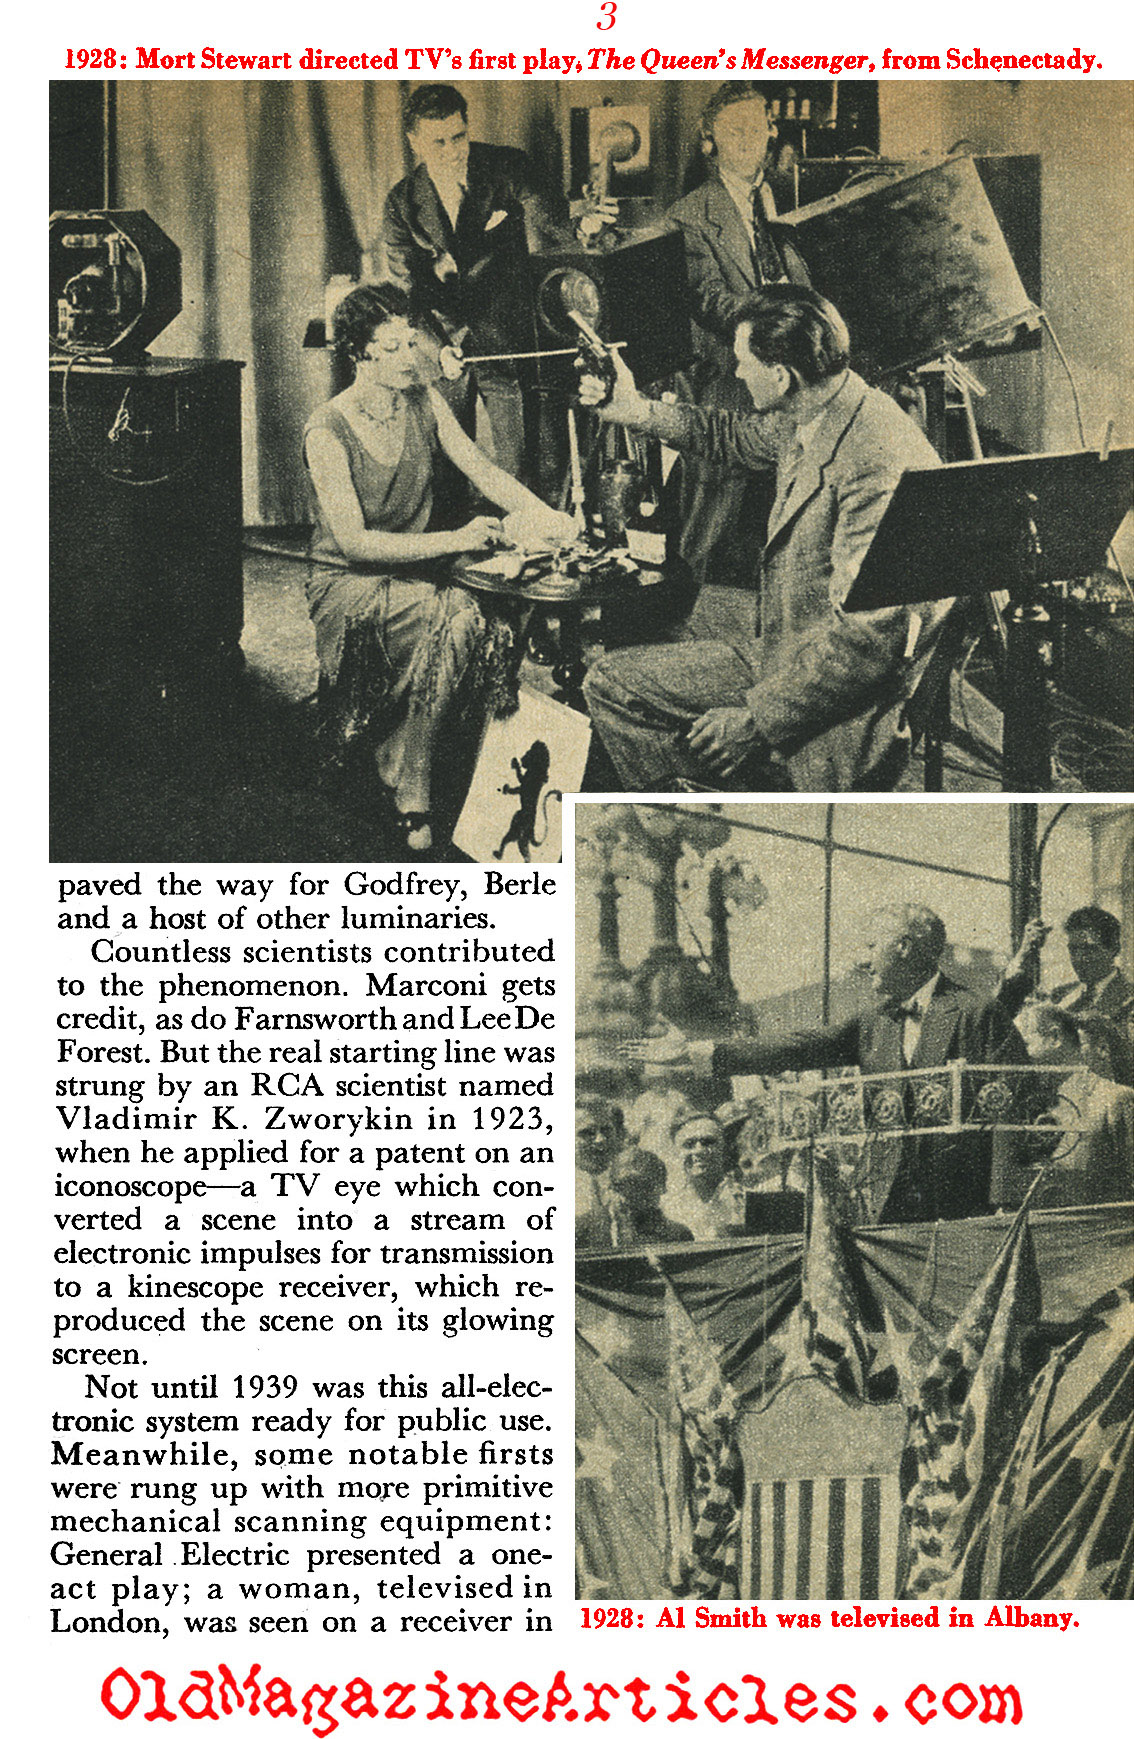 The First Thirty Years of Television (Coronet Magazine, 1954)